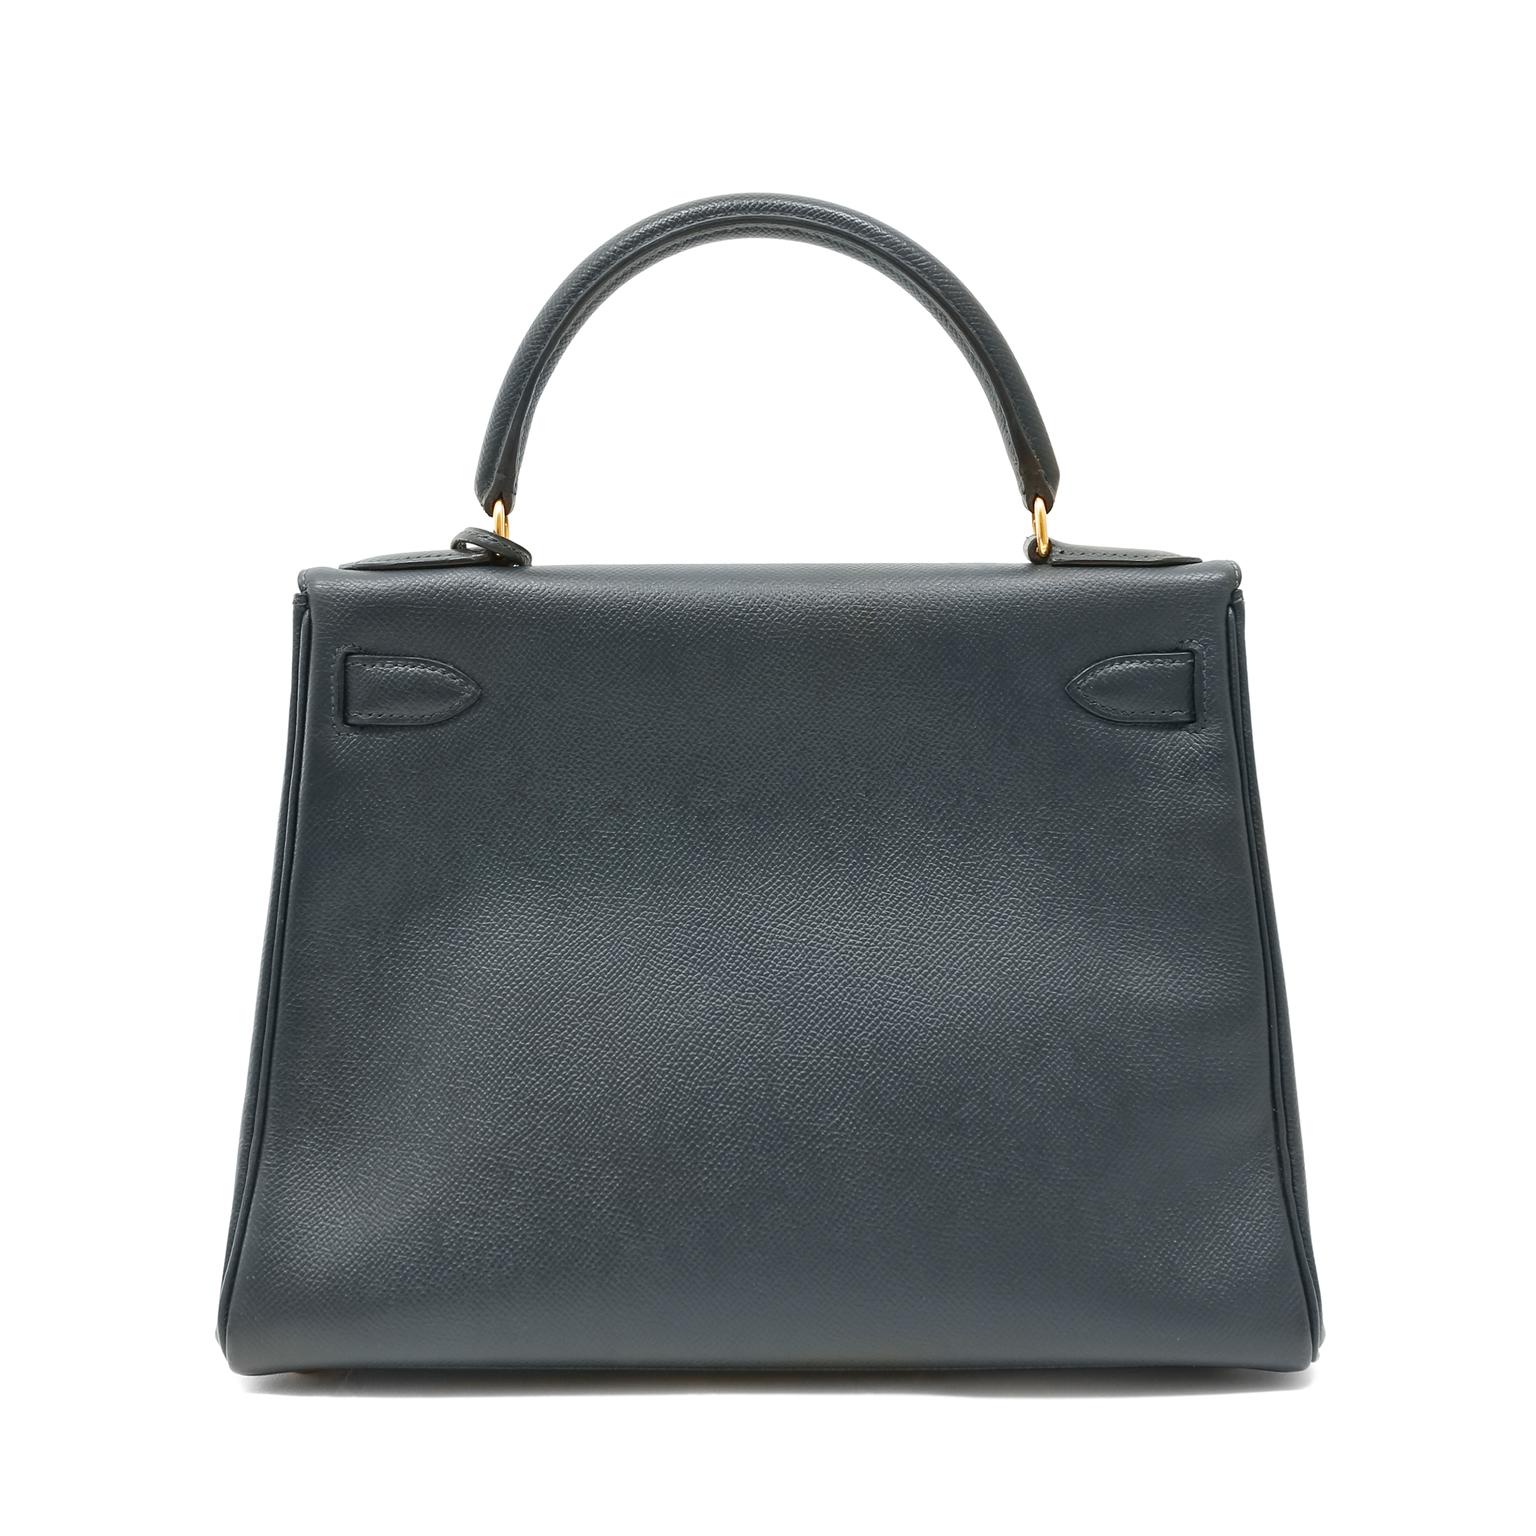 This authentic Hermès Midnight Blue Epsom Leather 28 cm Kelly is in excellent condition.  The ladylike Kelly is in high demand and requires extensive waiting periods from Hermès.  Classic deep navy blue paired with gold hardware is a timeless